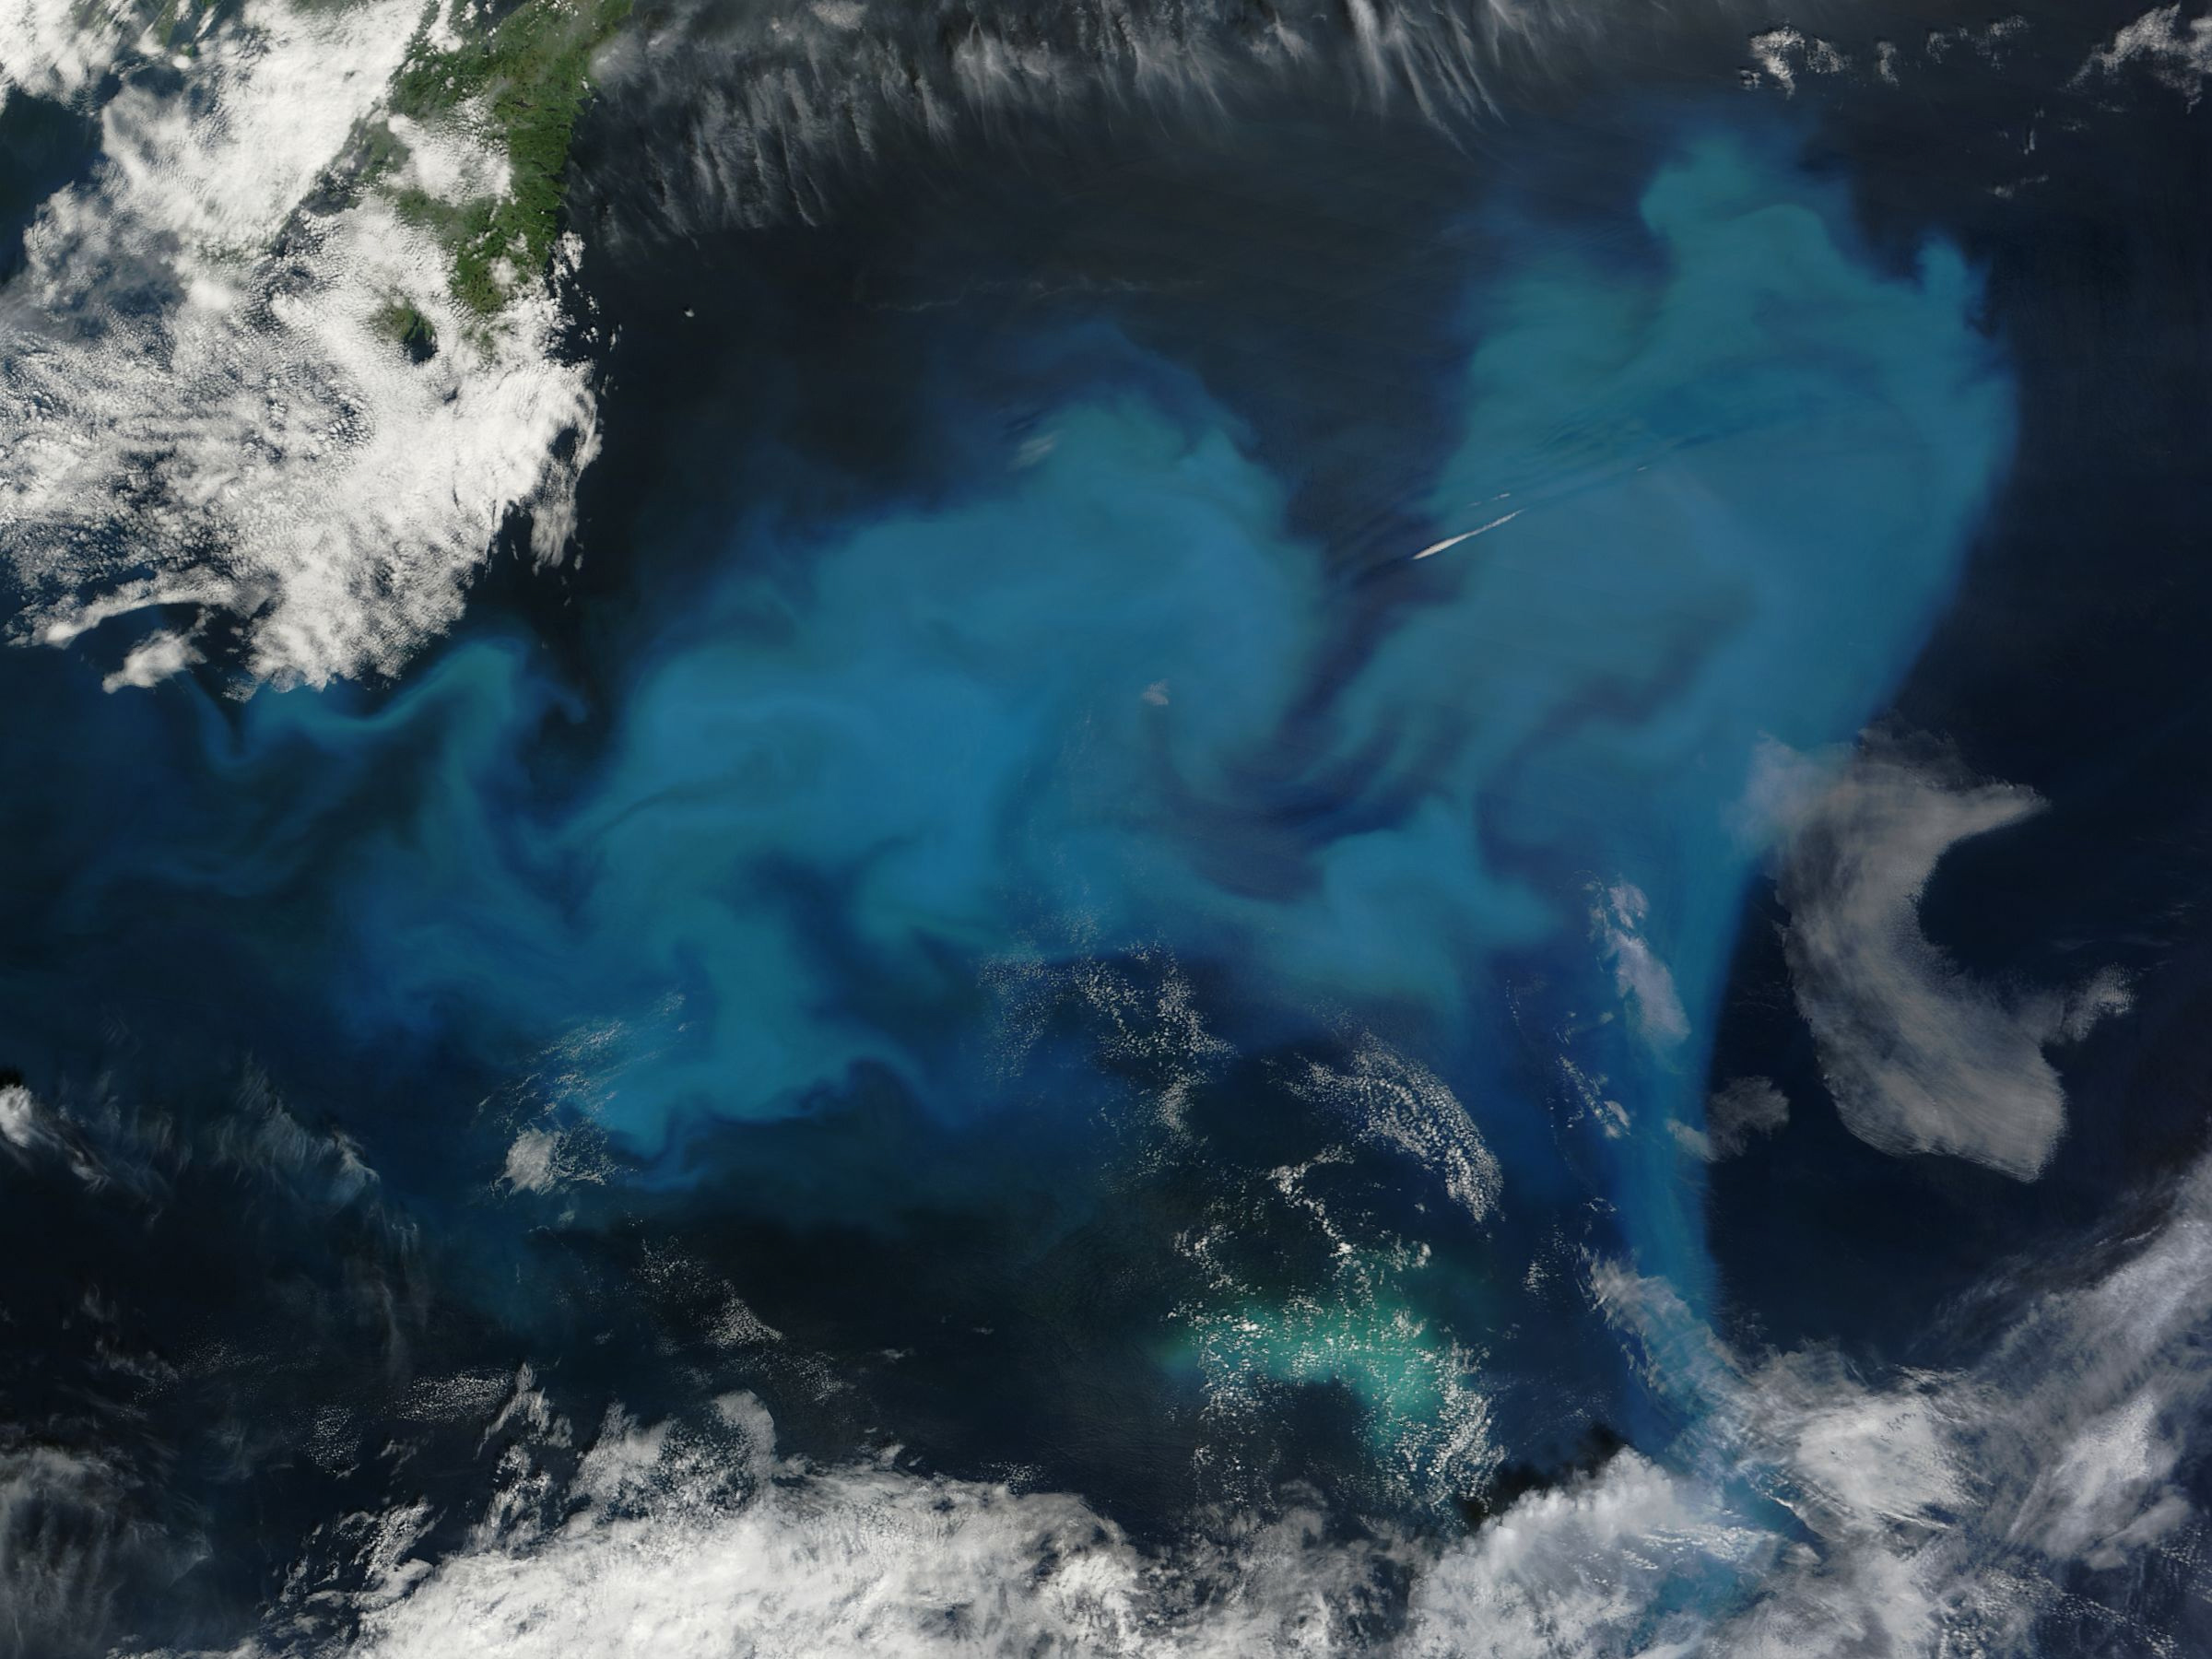 The image is a satellite view, peering down on the ocean. The background of the image is the dark blue color of the ocean, but centered in the image is a swirling shape of light blue, milky substance – phytoplankton making up a bloom. In the foreground of the image are bright white clouds, seen in the top left corner and along the bottom of the image.